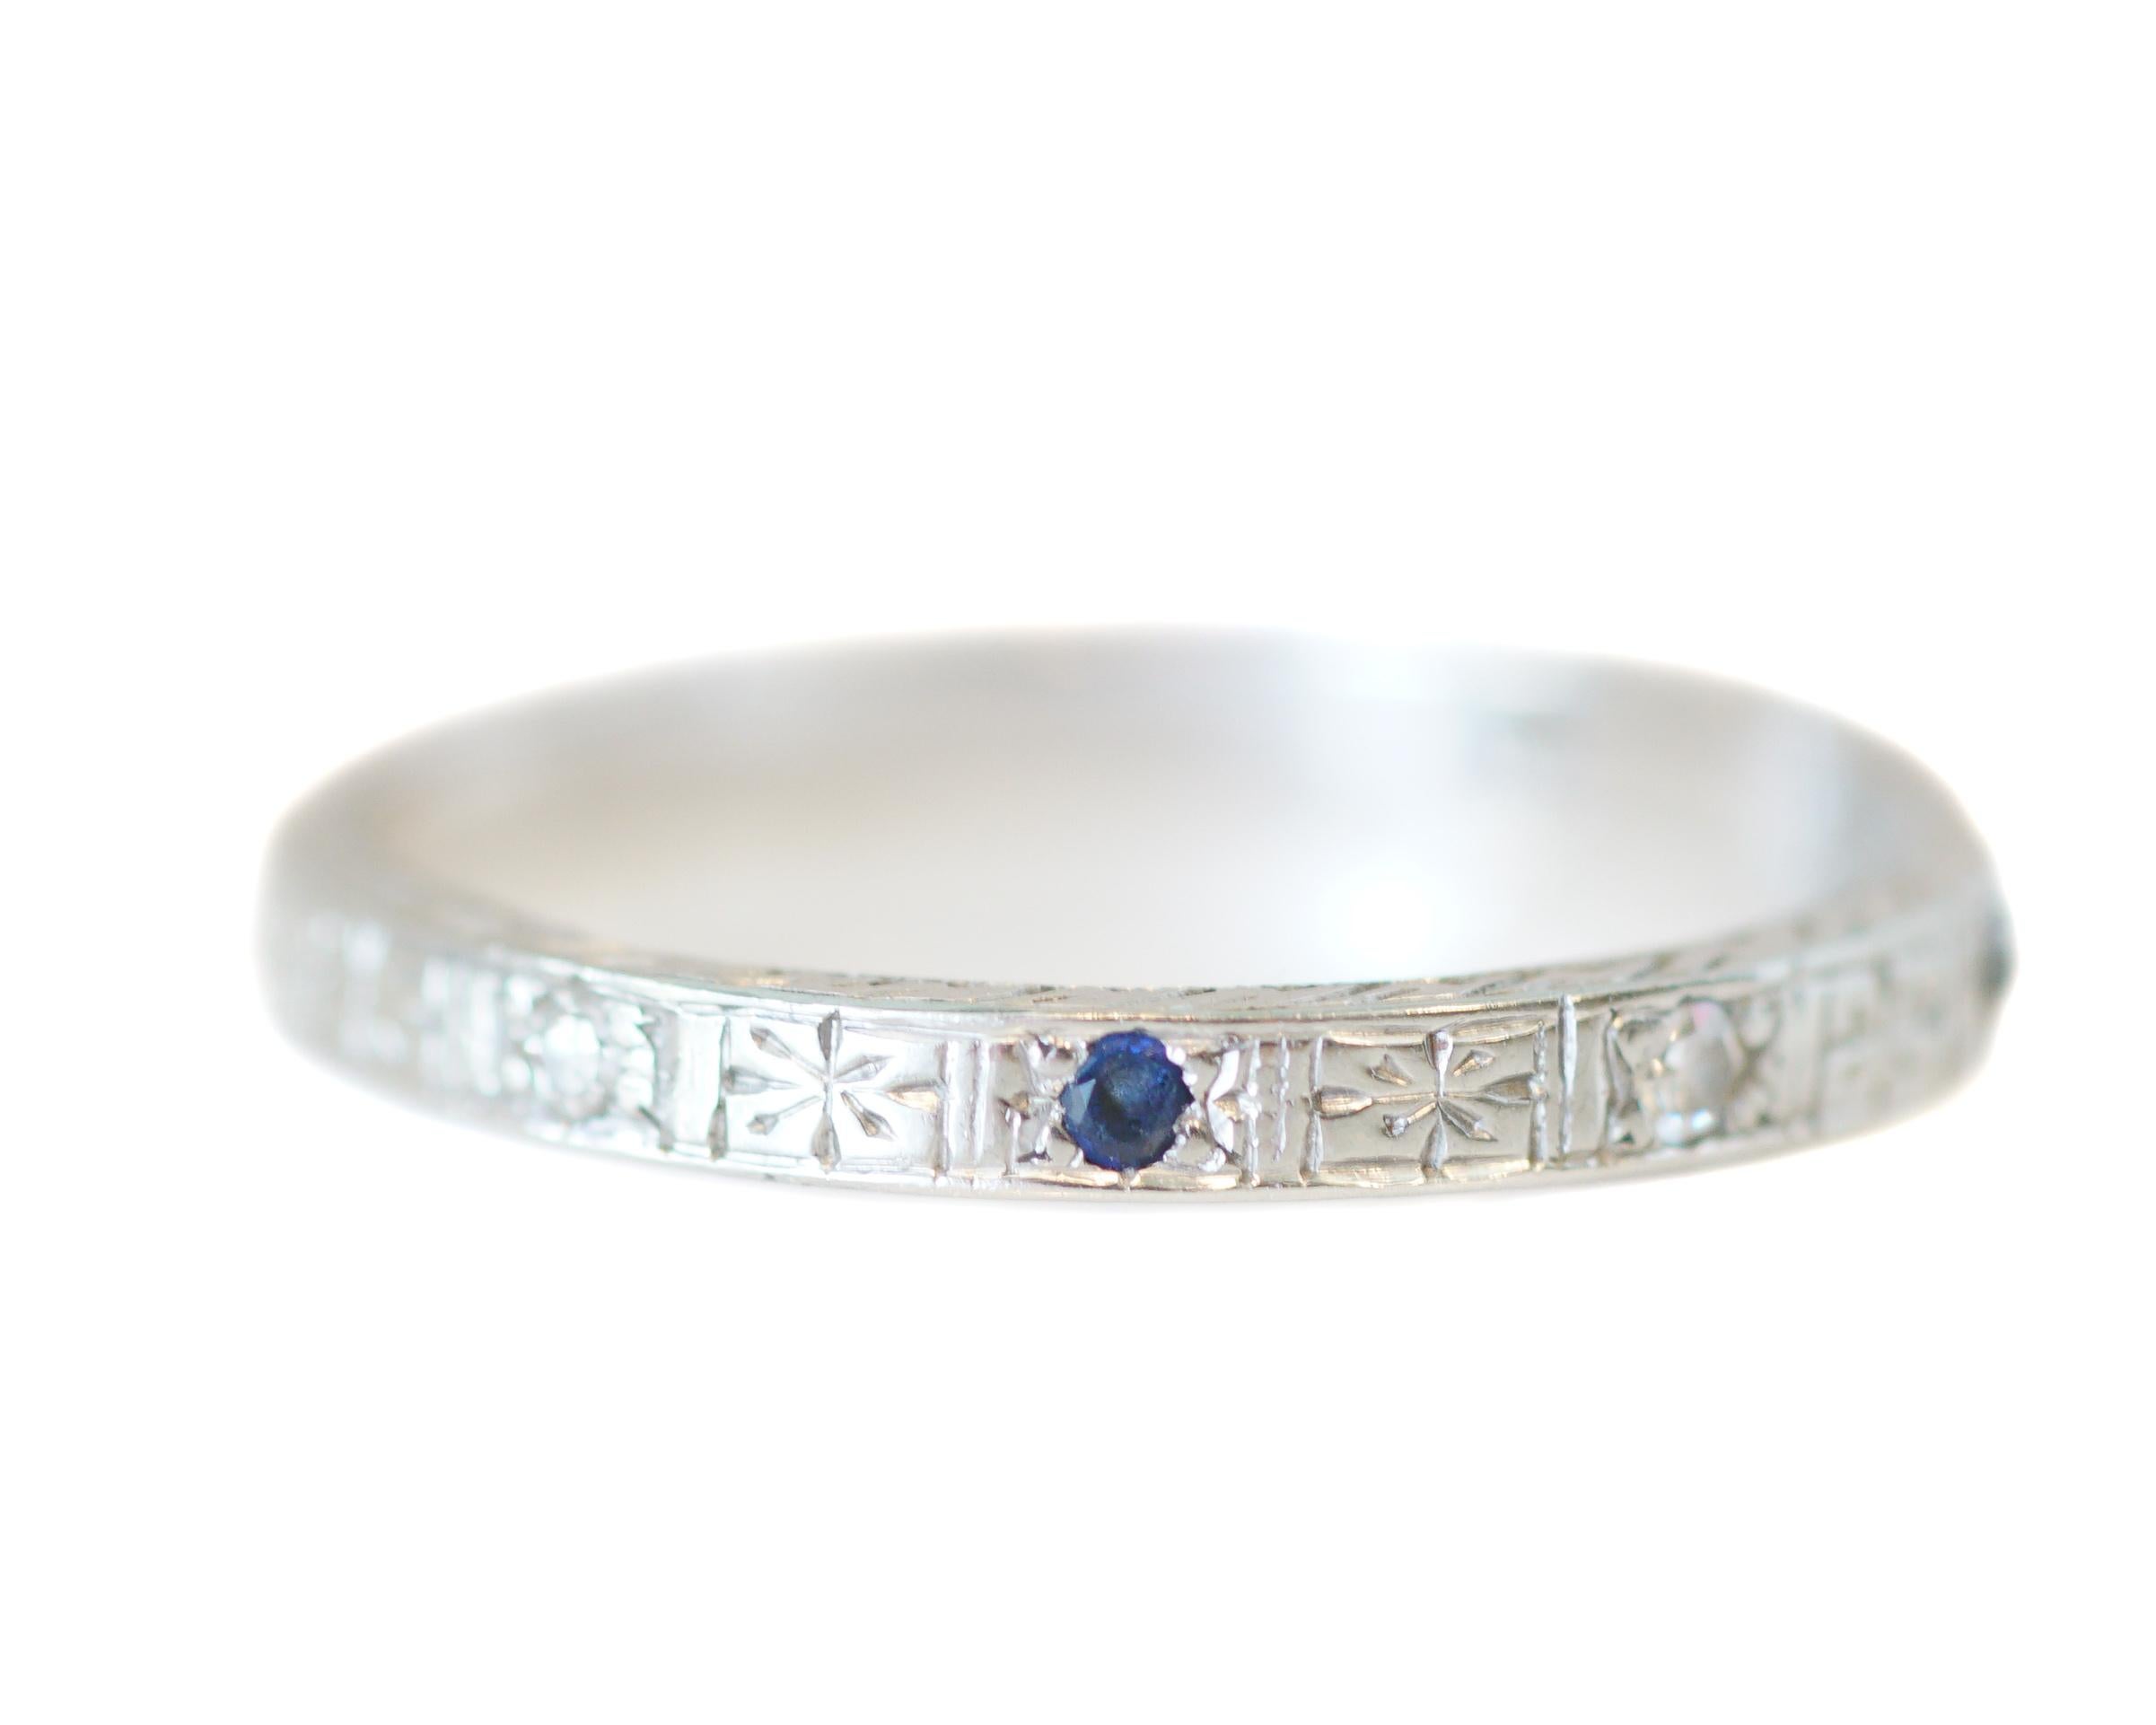 Description: 
This piece is a 1930s Art Deco style 18K white gold wedding band with alternating diamonds and blue sapphires. The gems are spaced evenly around the beautifully engraved band.  A perfect band with a just enough pop of color that will